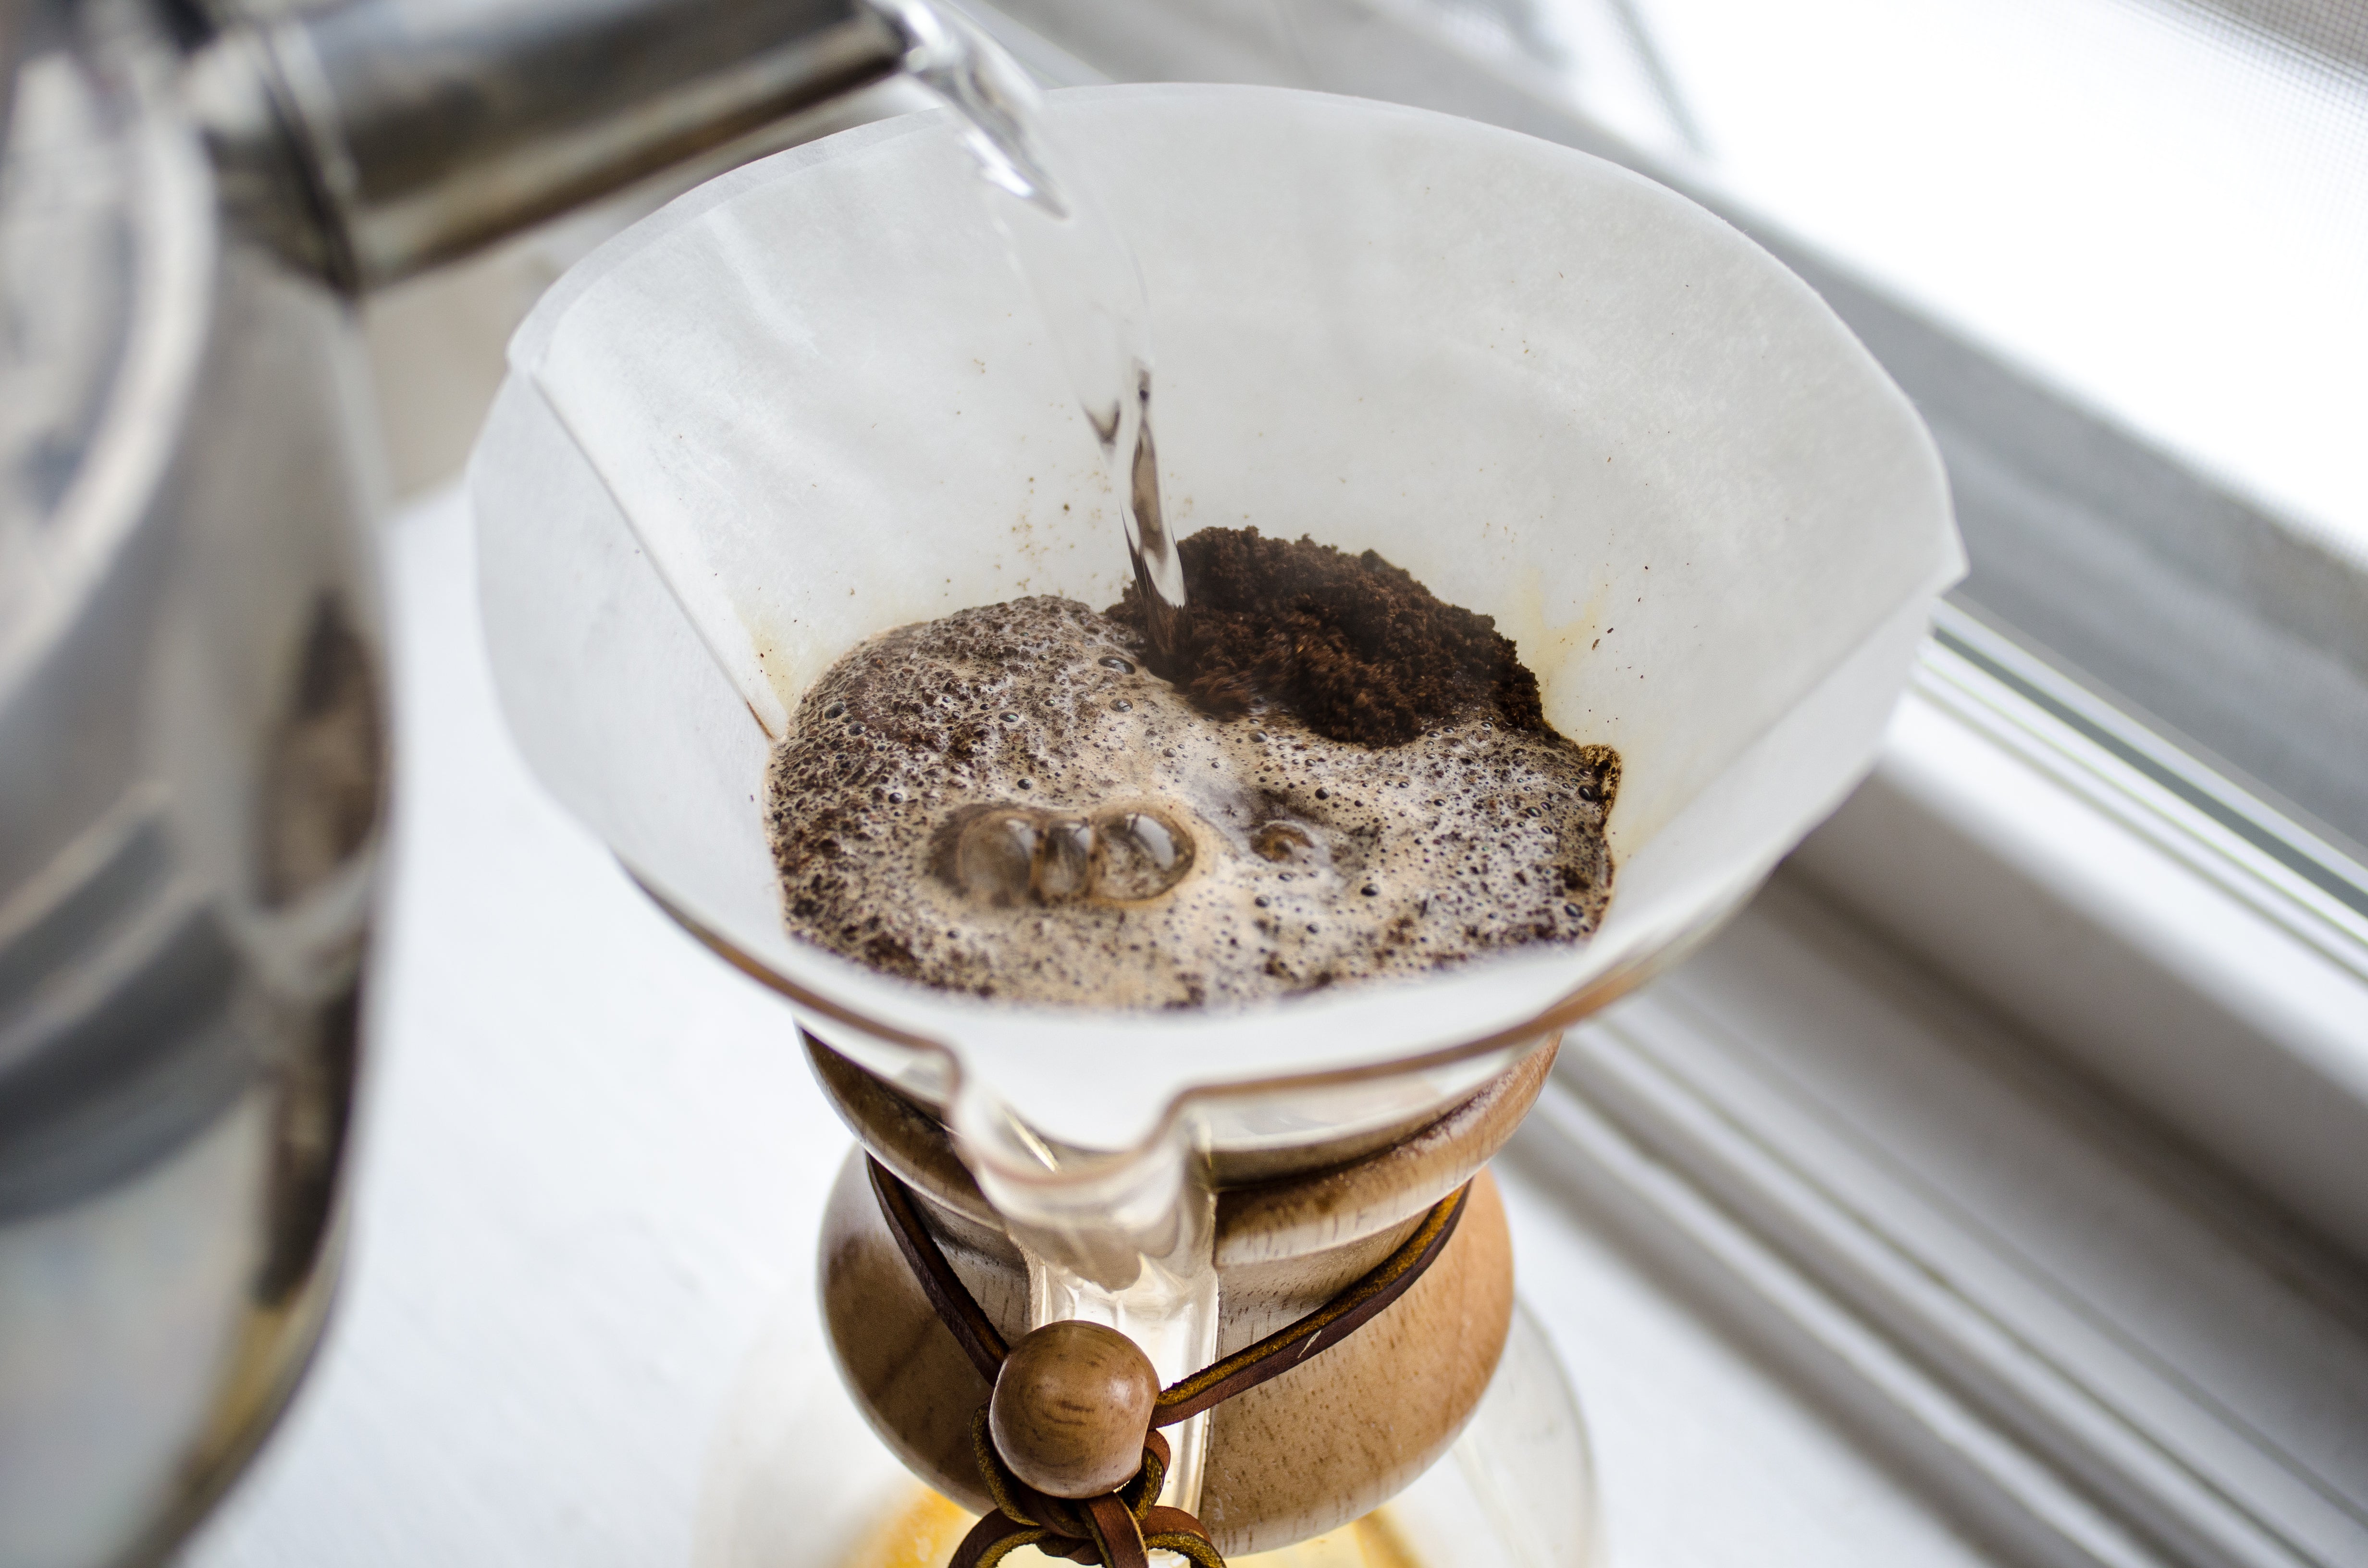 Does this look good? Beginner here using Chemex with a cheap